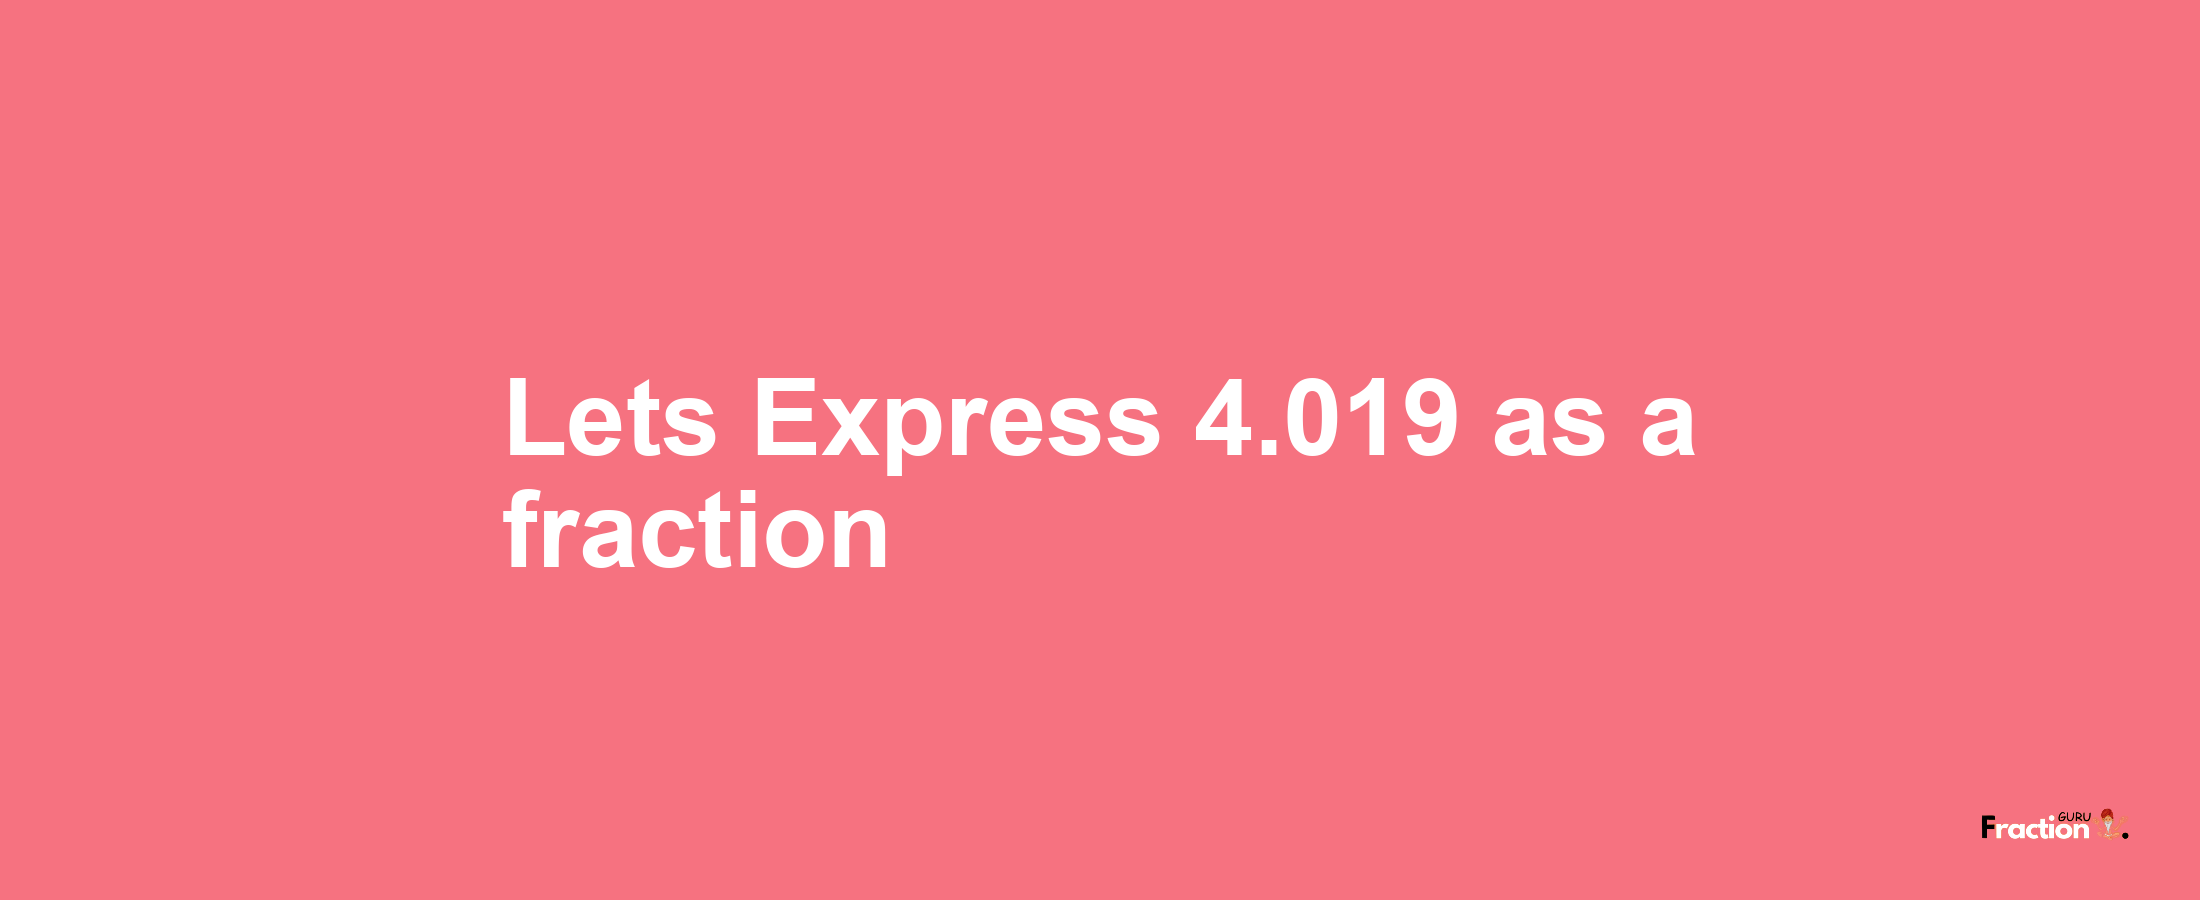 Lets Express 4.019 as afraction